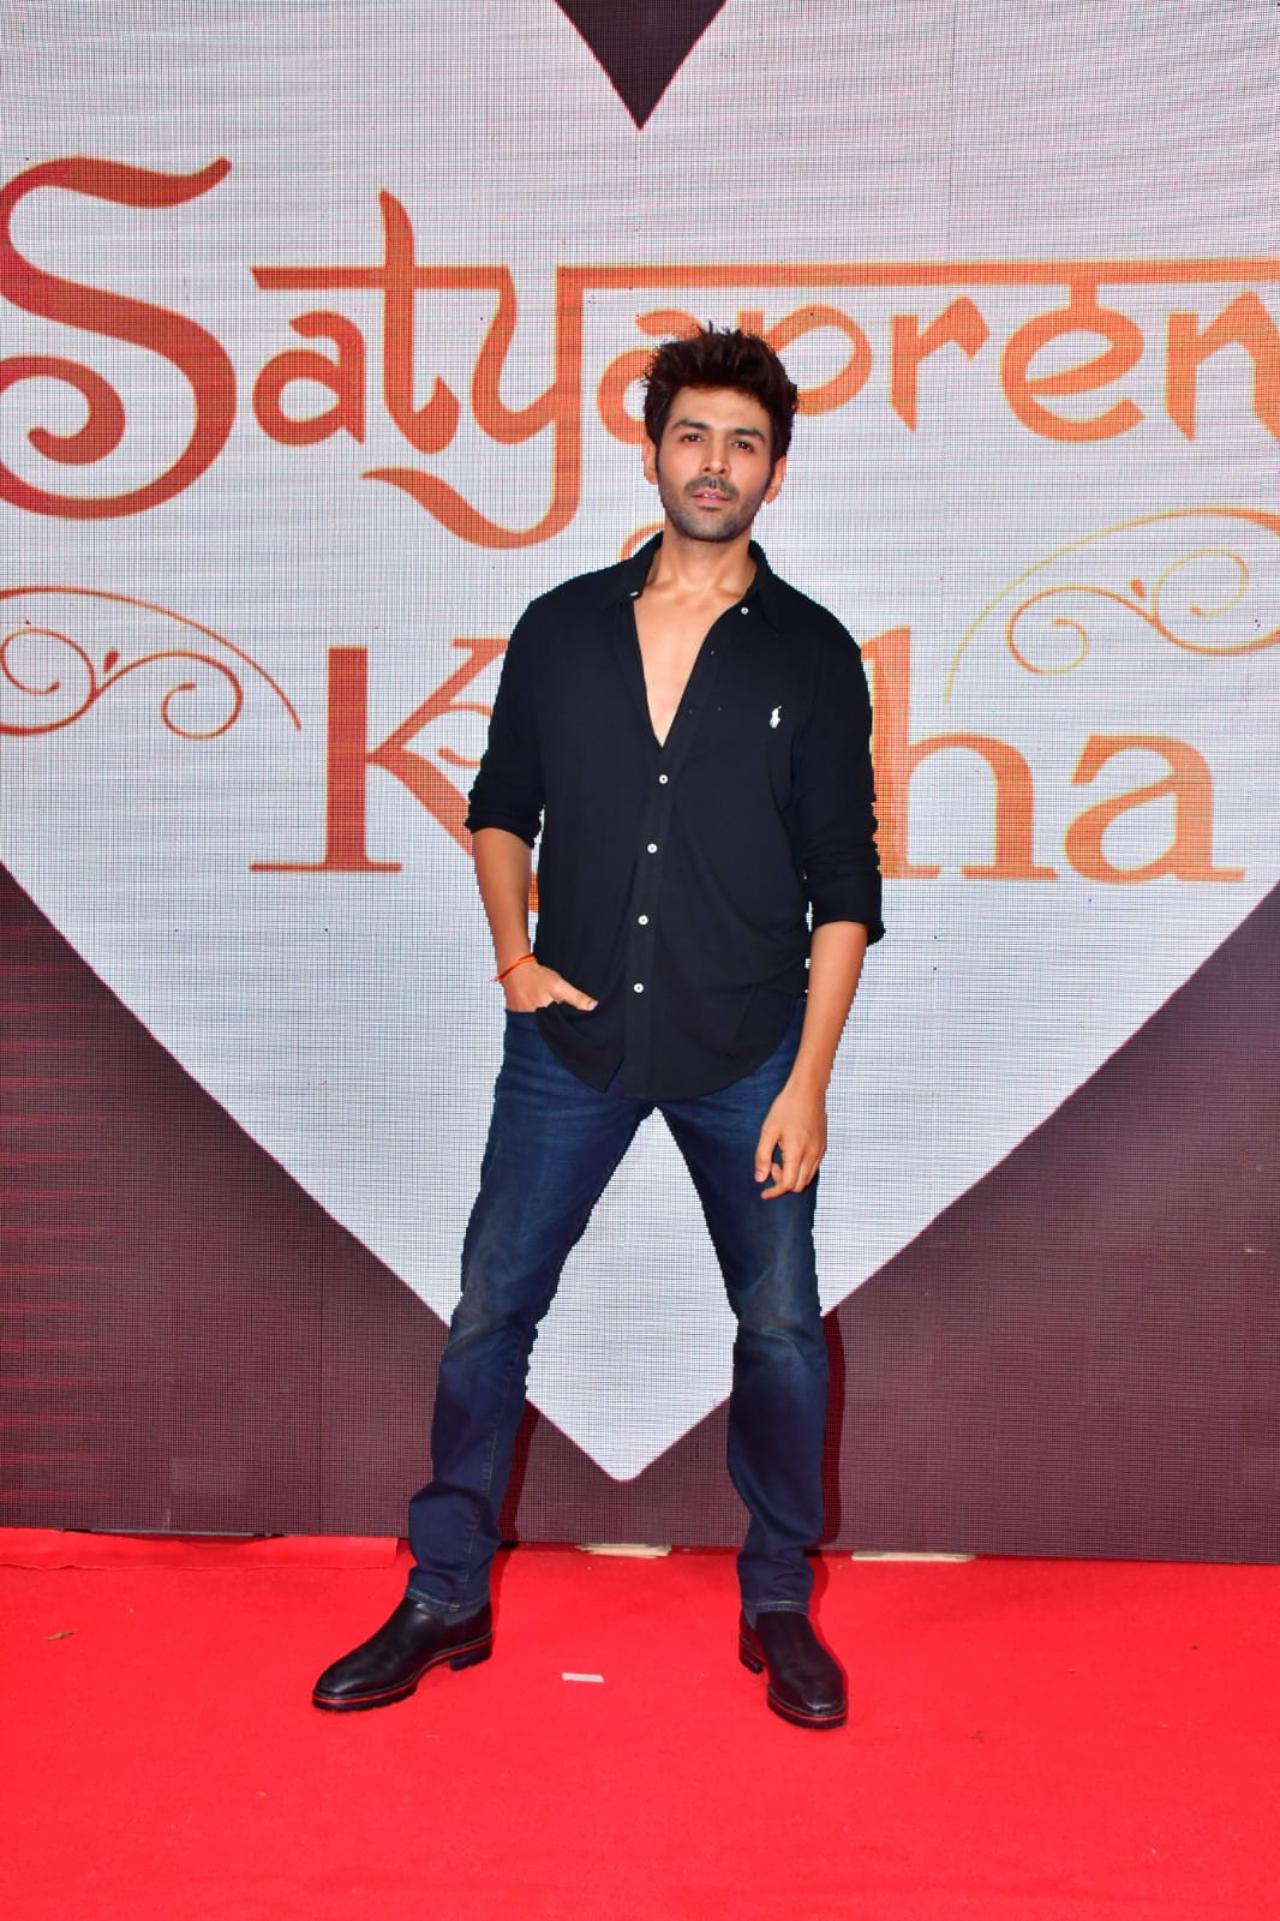 Kartik Aaryan also went for an all-black outfit for the screening. His parents were also seen at the screening cheering for him